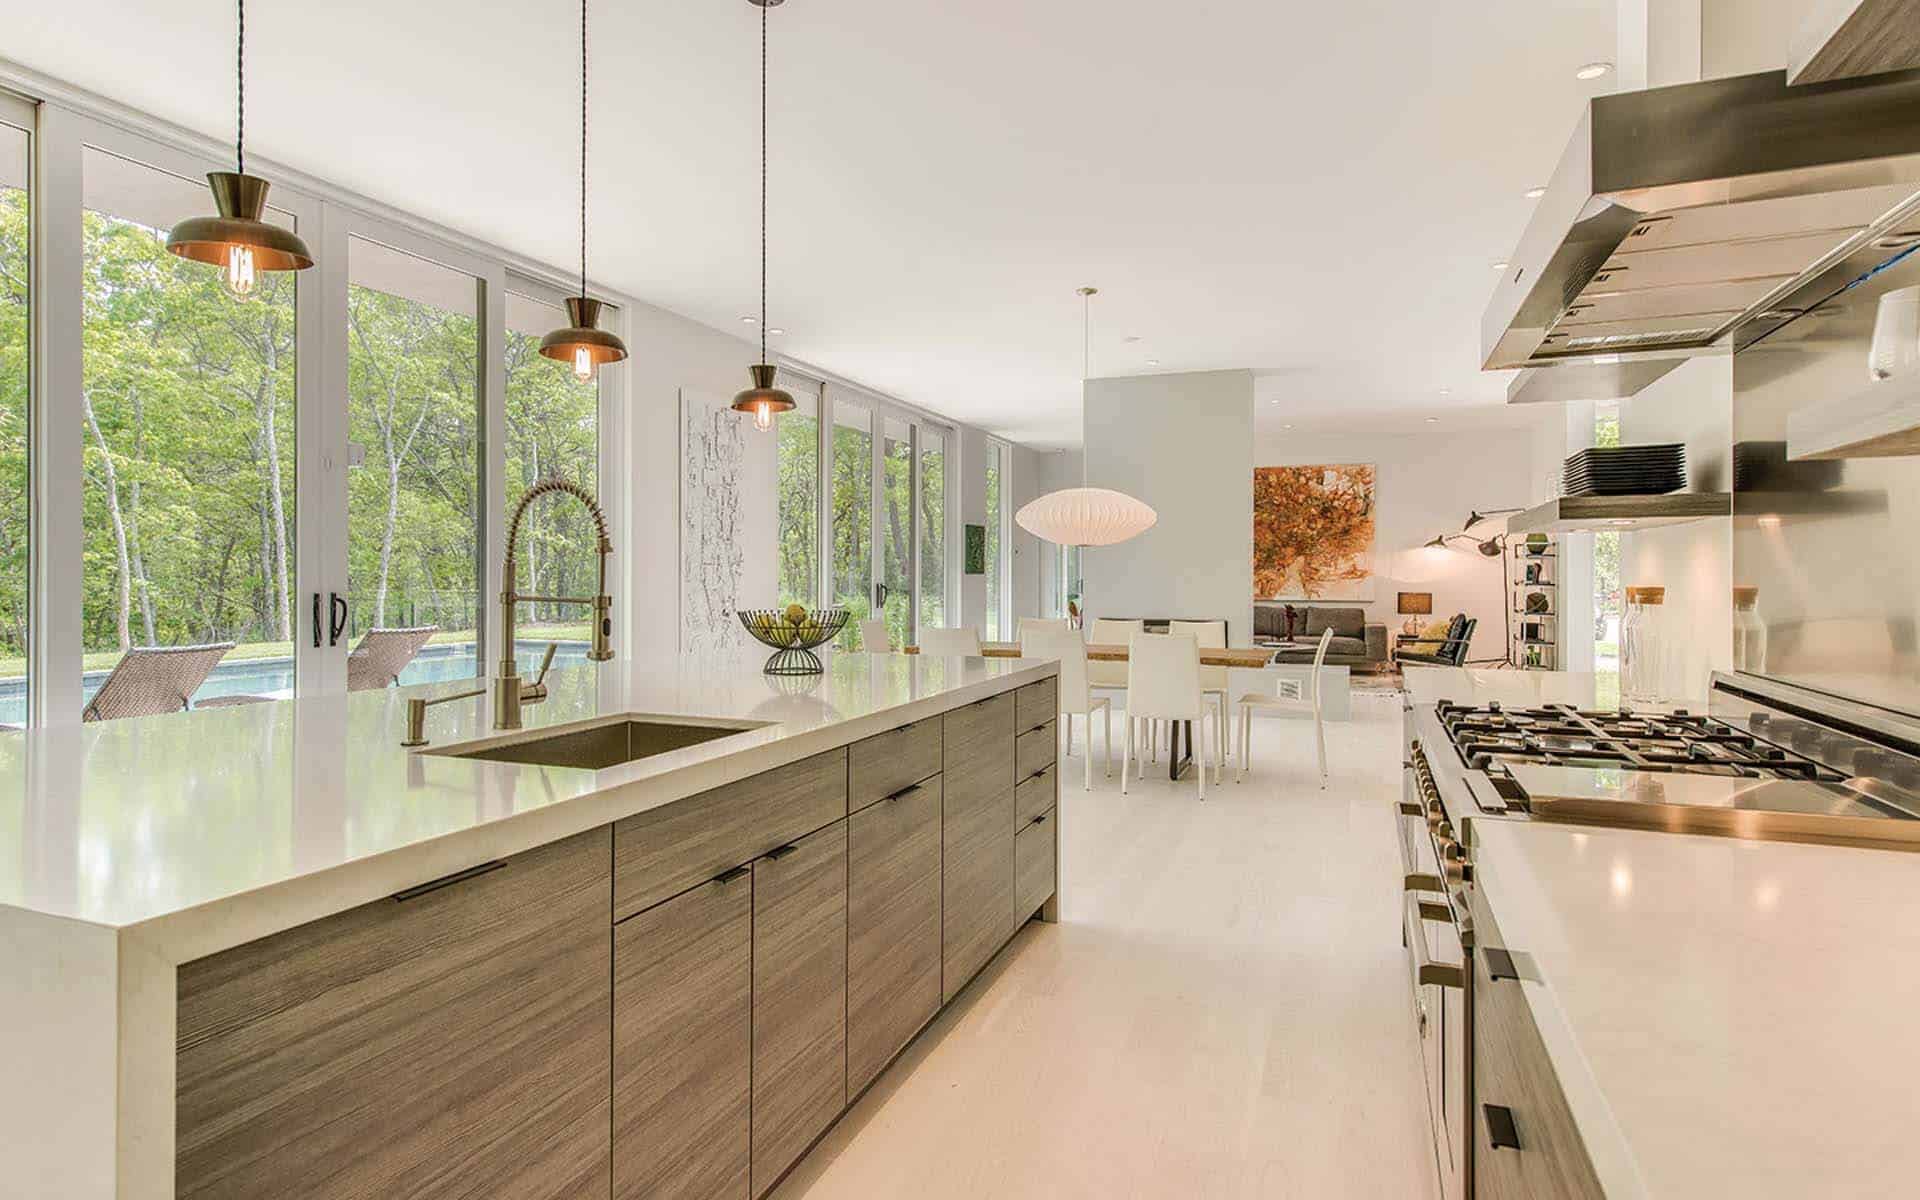 Contemporary Hamptons kitchen features quartz waterfall countertop, Horizontal grained laminate cabinets and matching laminate floating shelves.